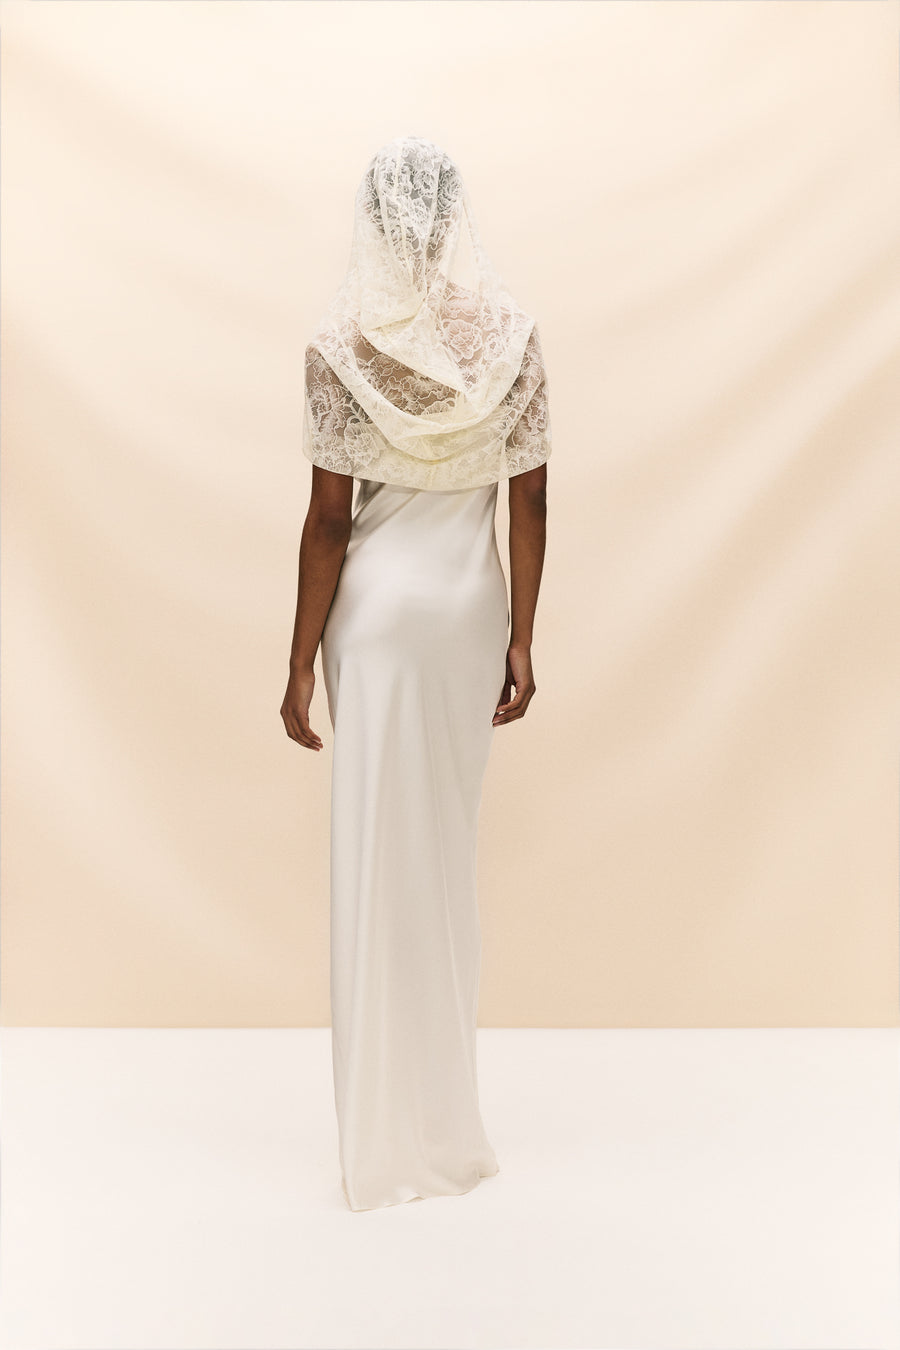 IVORY LACE HOODED VEIL